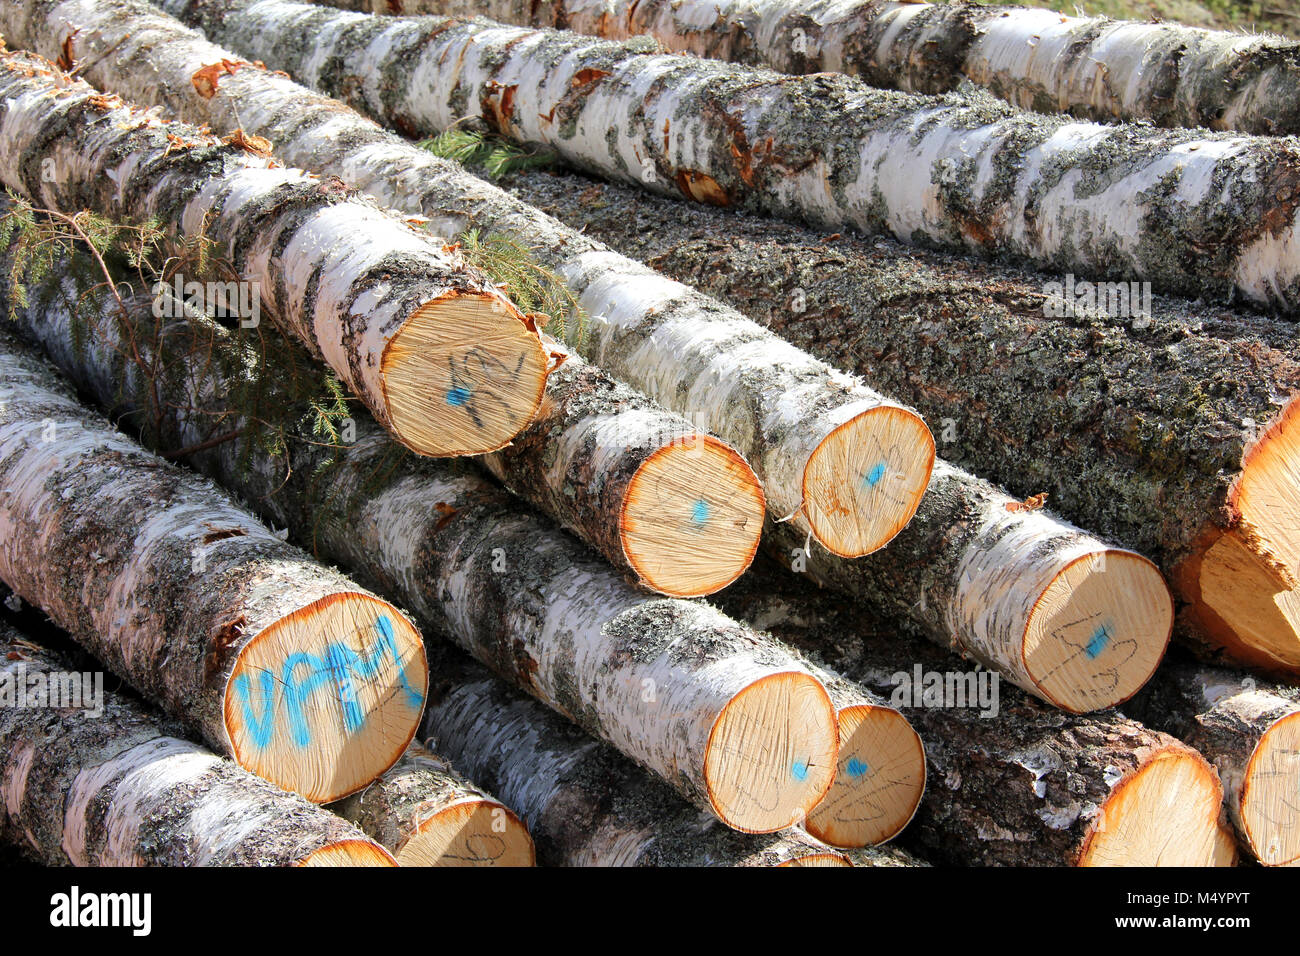 Birch wood logs stacked, detail. Stock Photo